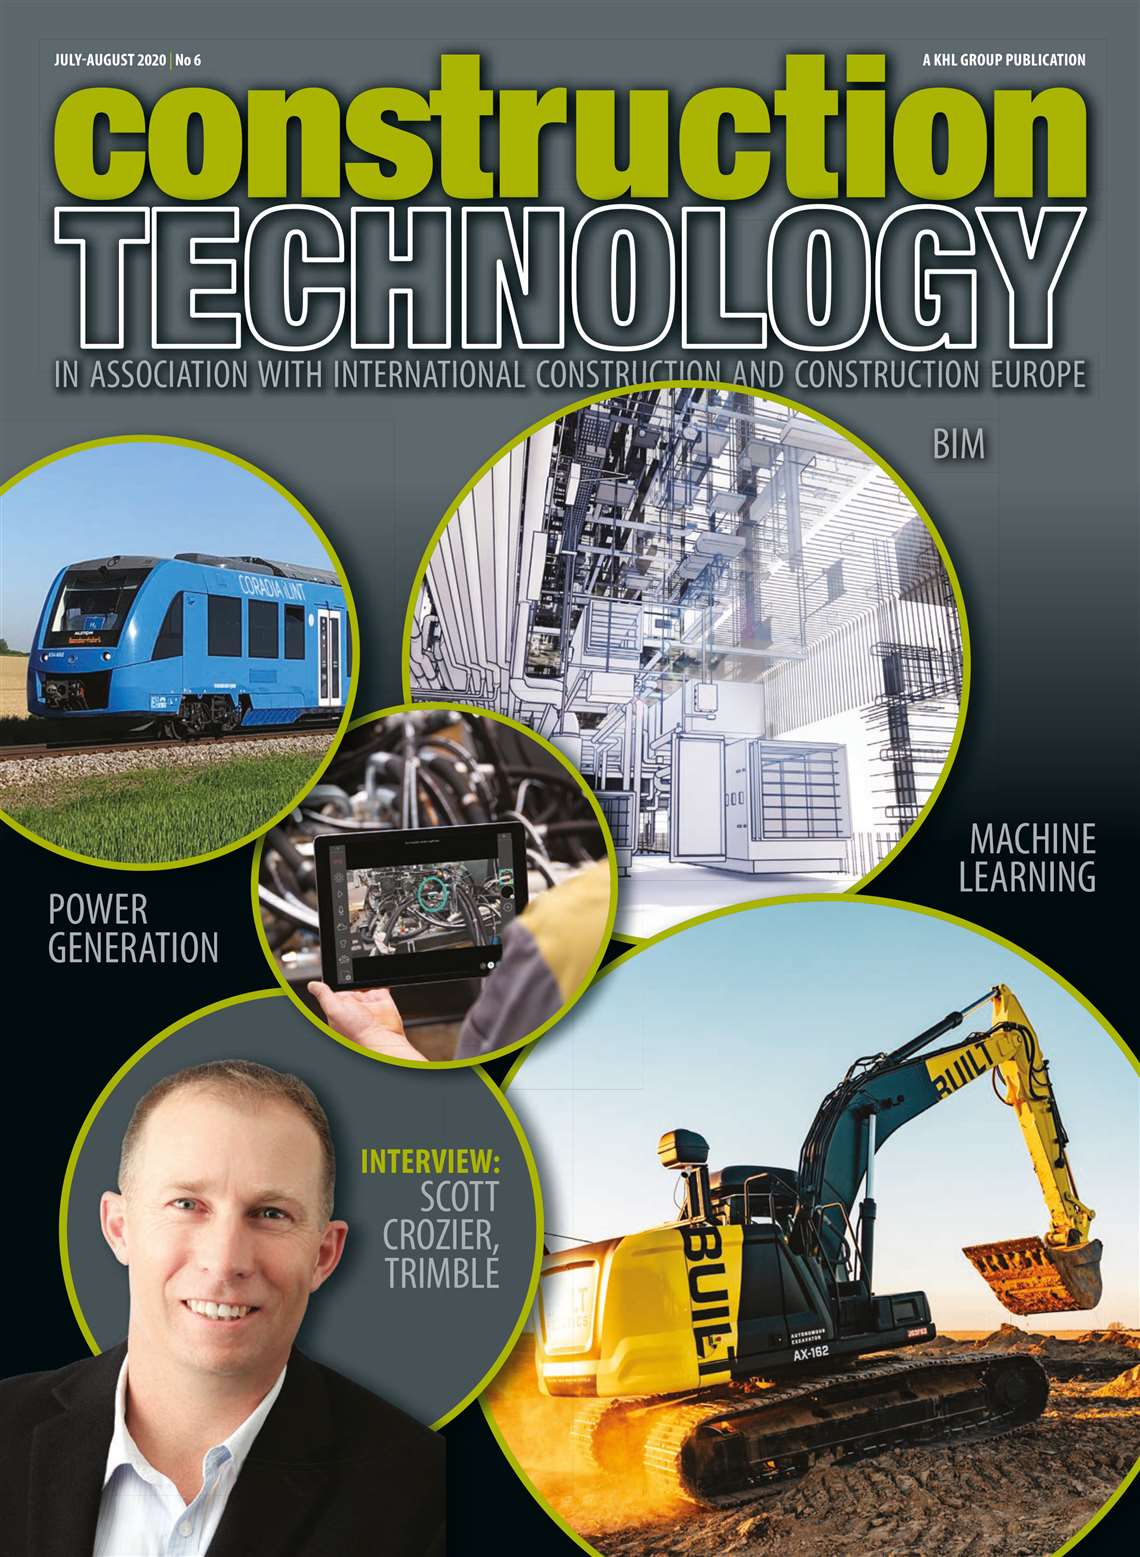 Construction Tech July-August 2020 - page1